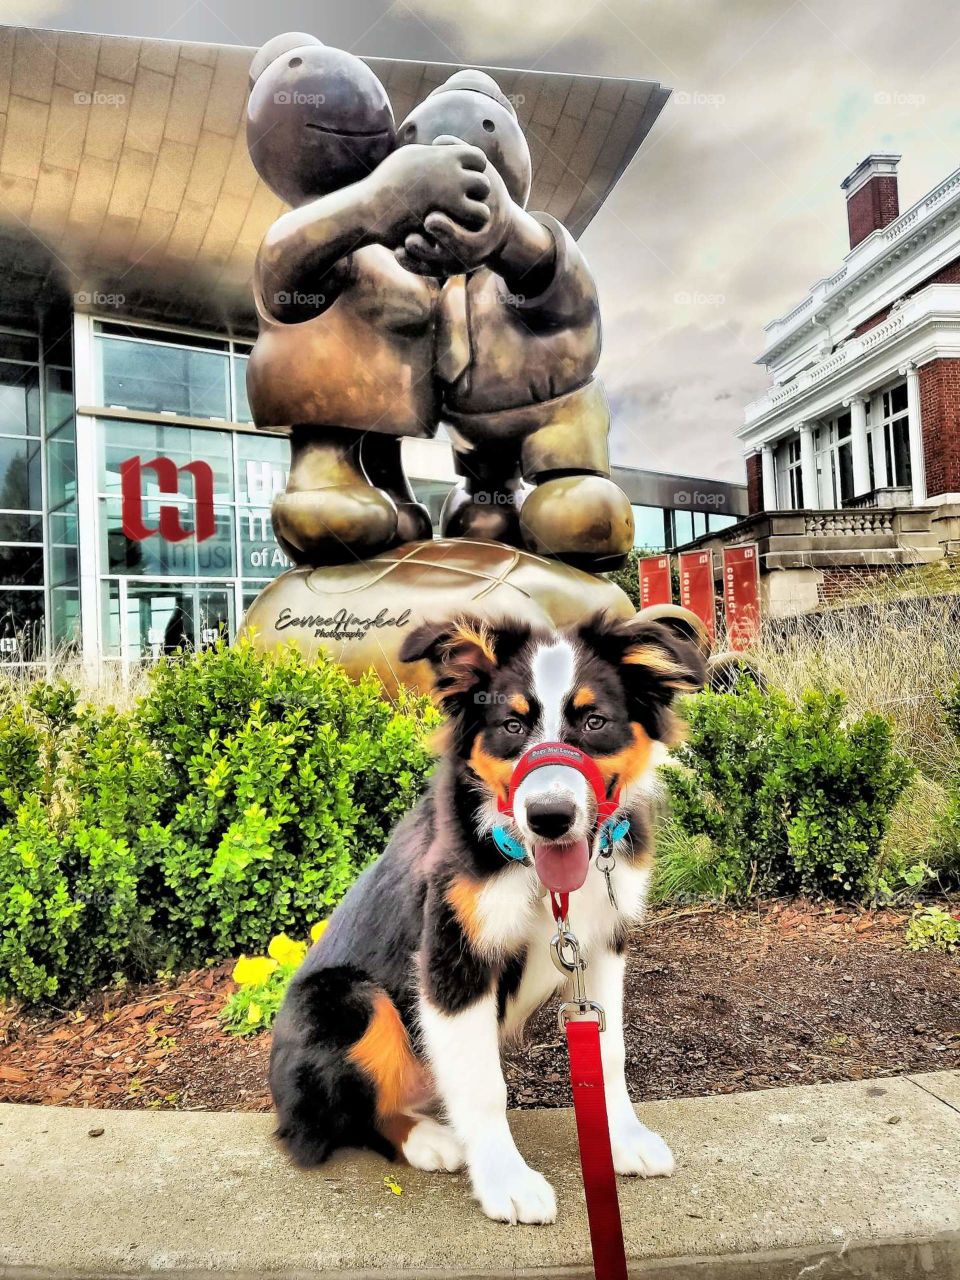 Dog posing with Sculpture